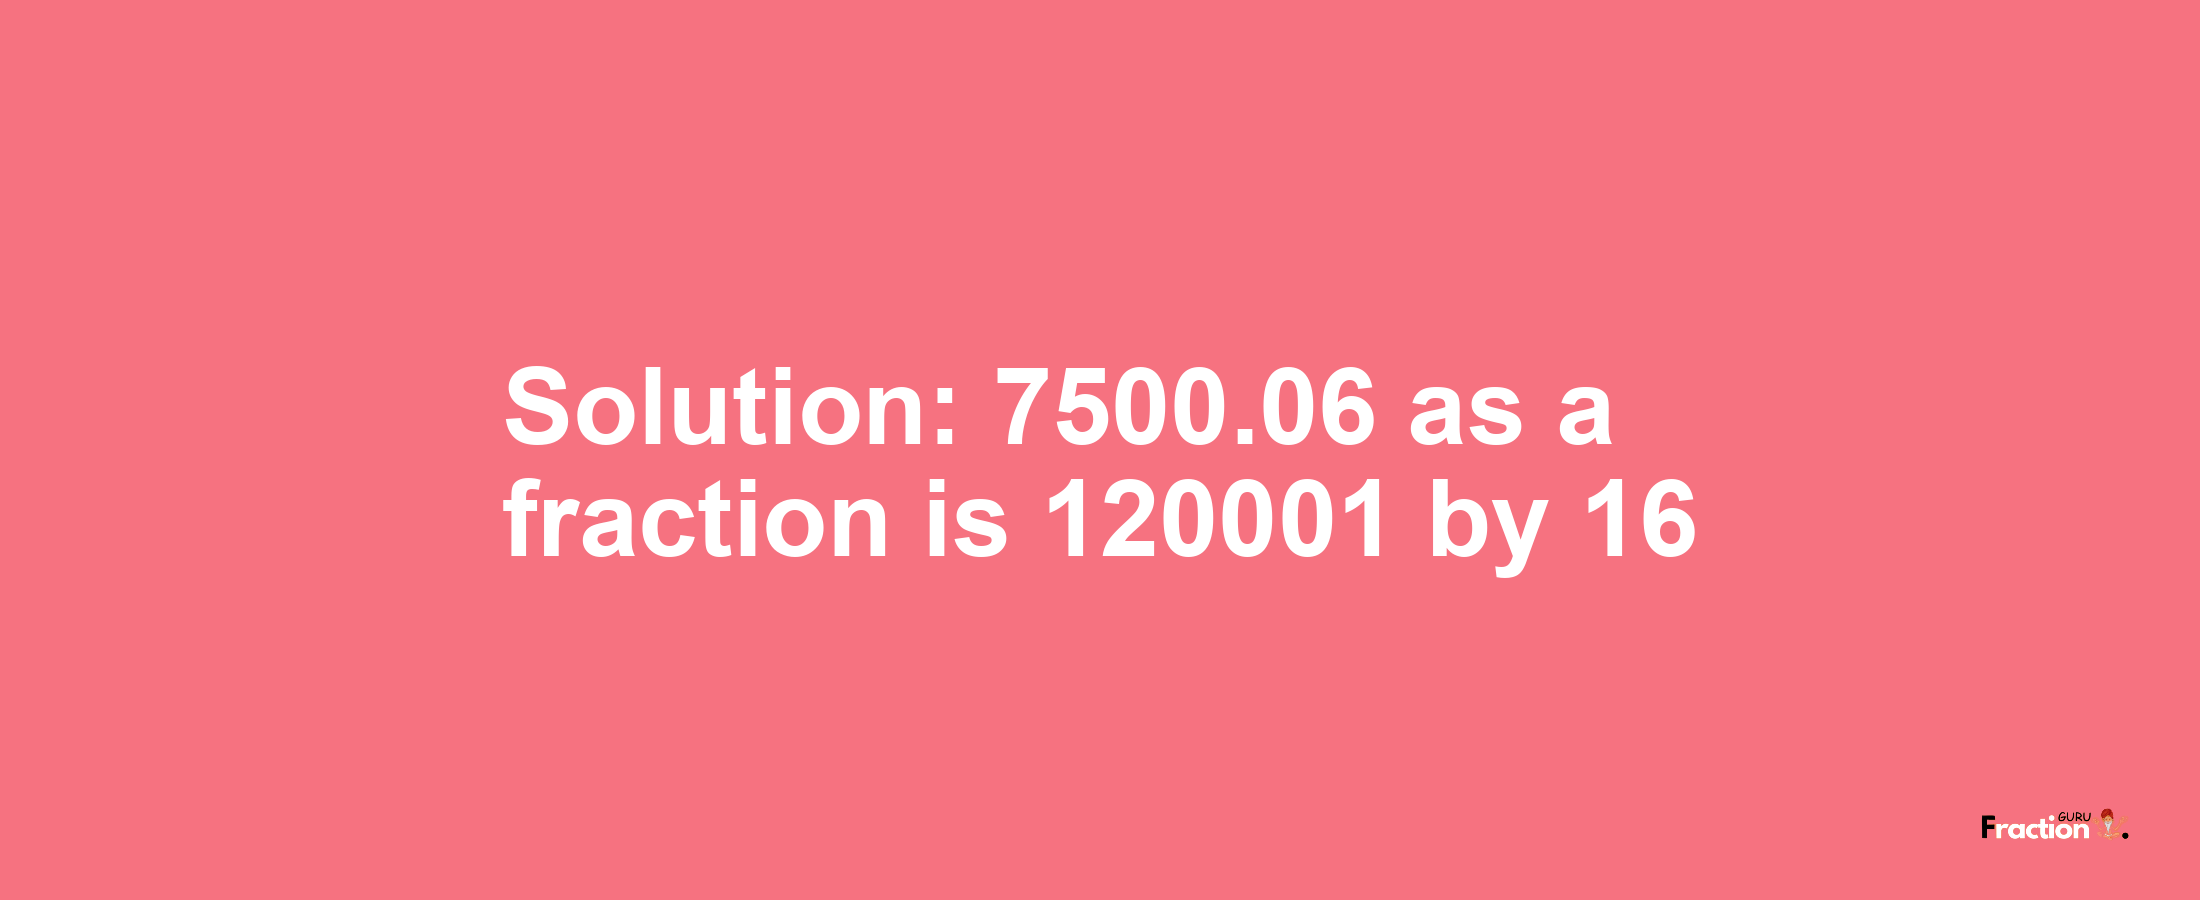 Solution:7500.06 as a fraction is 120001/16